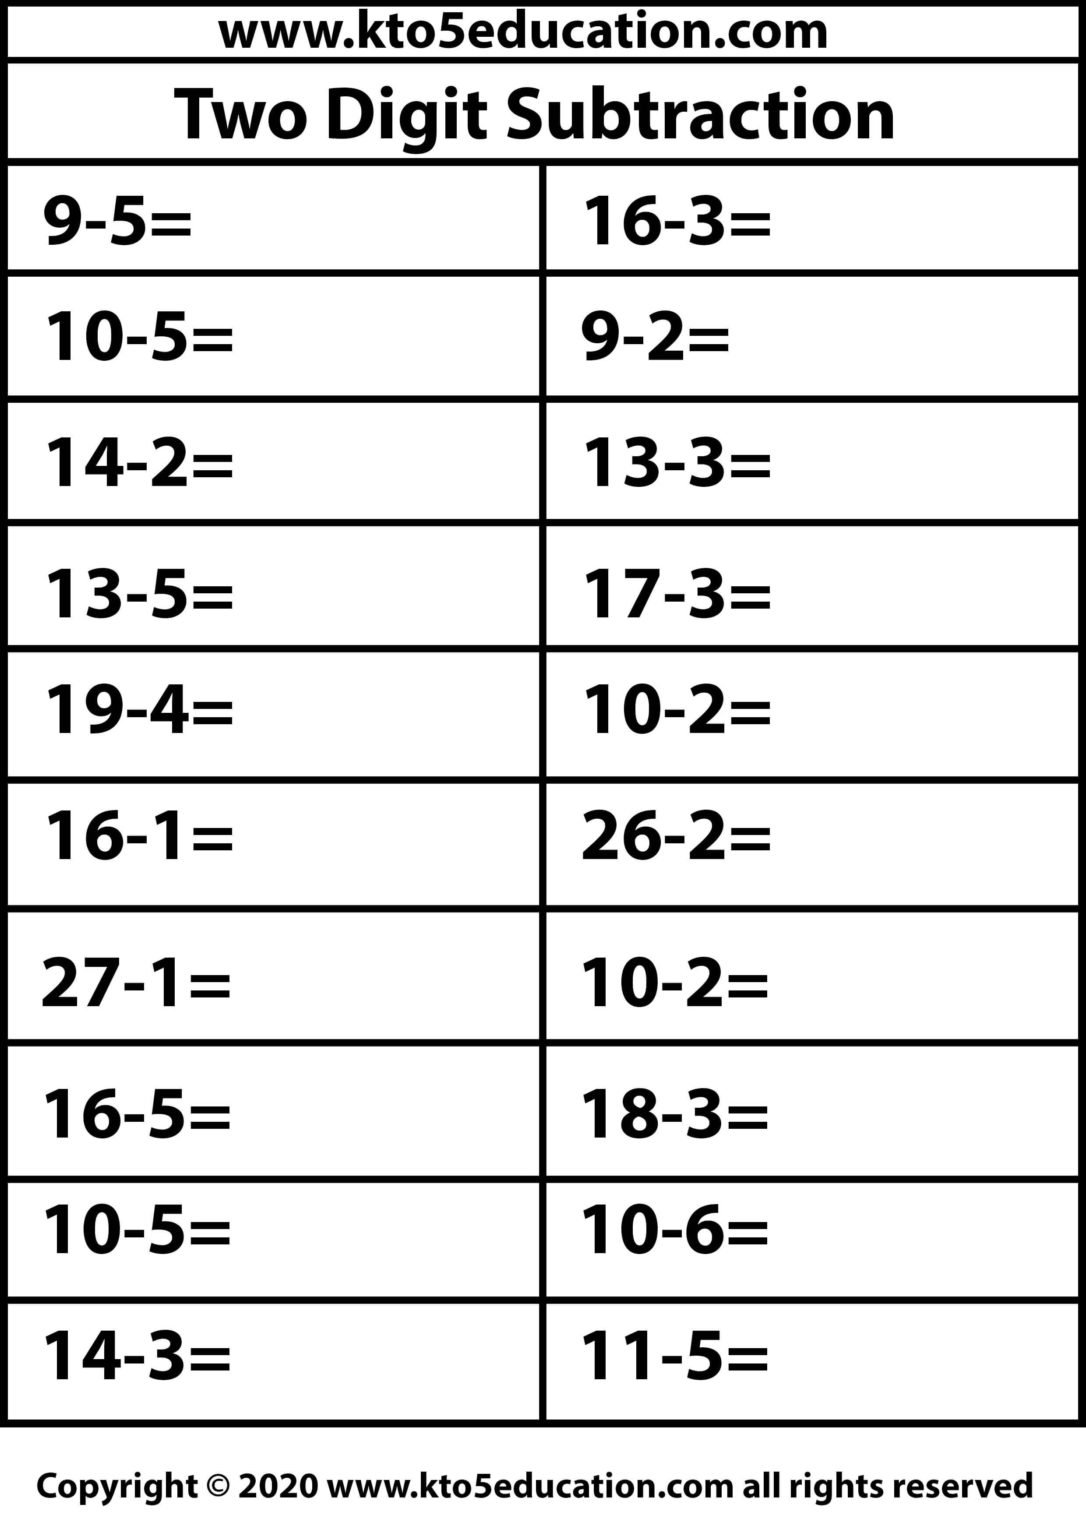 two-digit-subtraction-worksheet-2-kto5education-free